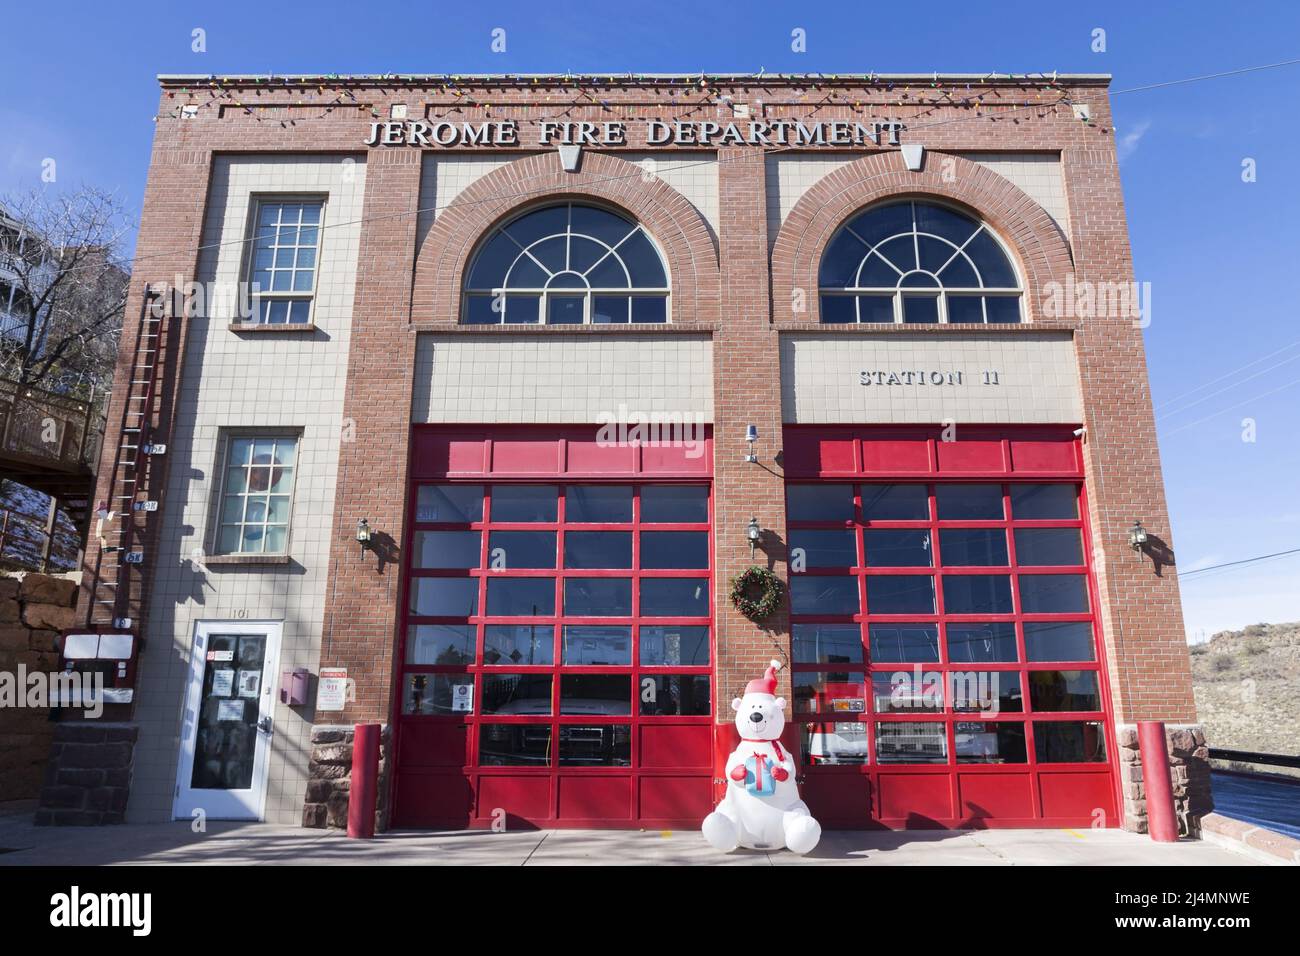 Front View of Fire Station Building on Jerome, Arizona Main Street with Santa Claus Figure in front of Garage Doors Stock Photo